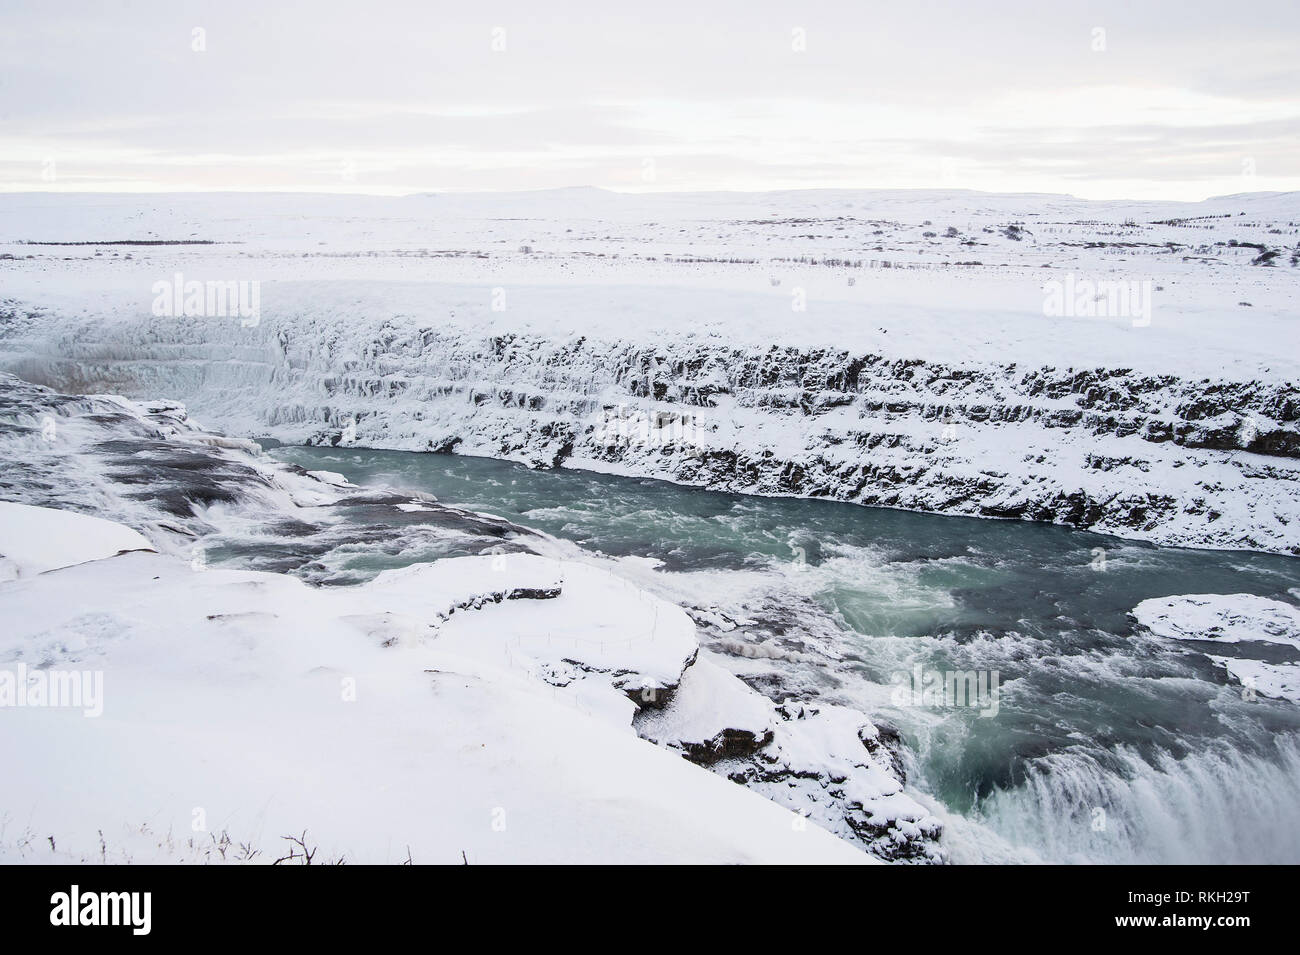 ICELAND: Gullfoss (Golden Waterfall) is an iconic waterfall of Iceland offering a spectacular view of the forces and beauty of untouched nature. Gullf Stock Photo